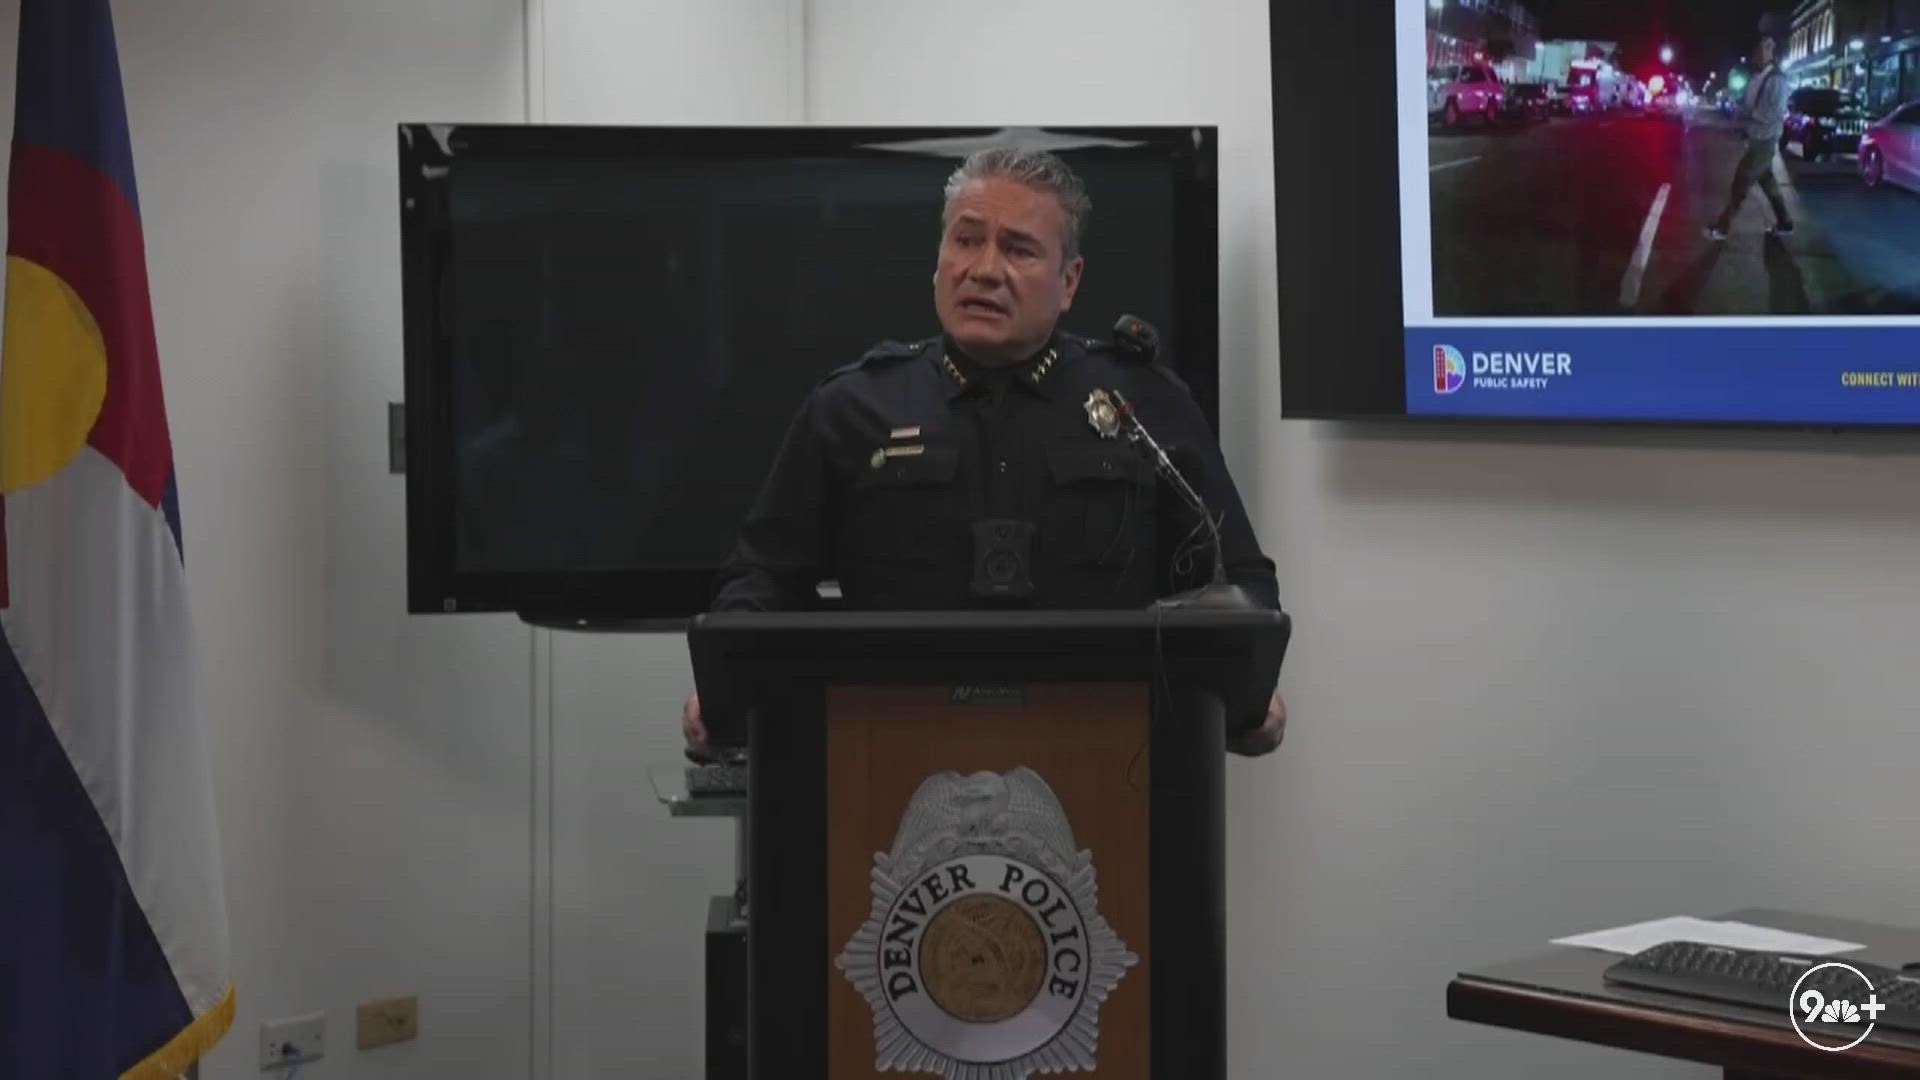 Denver Police Department give an update on a shooting involving officers that injured 6 in LoDo on Sunday, and two other shootings involving officers.